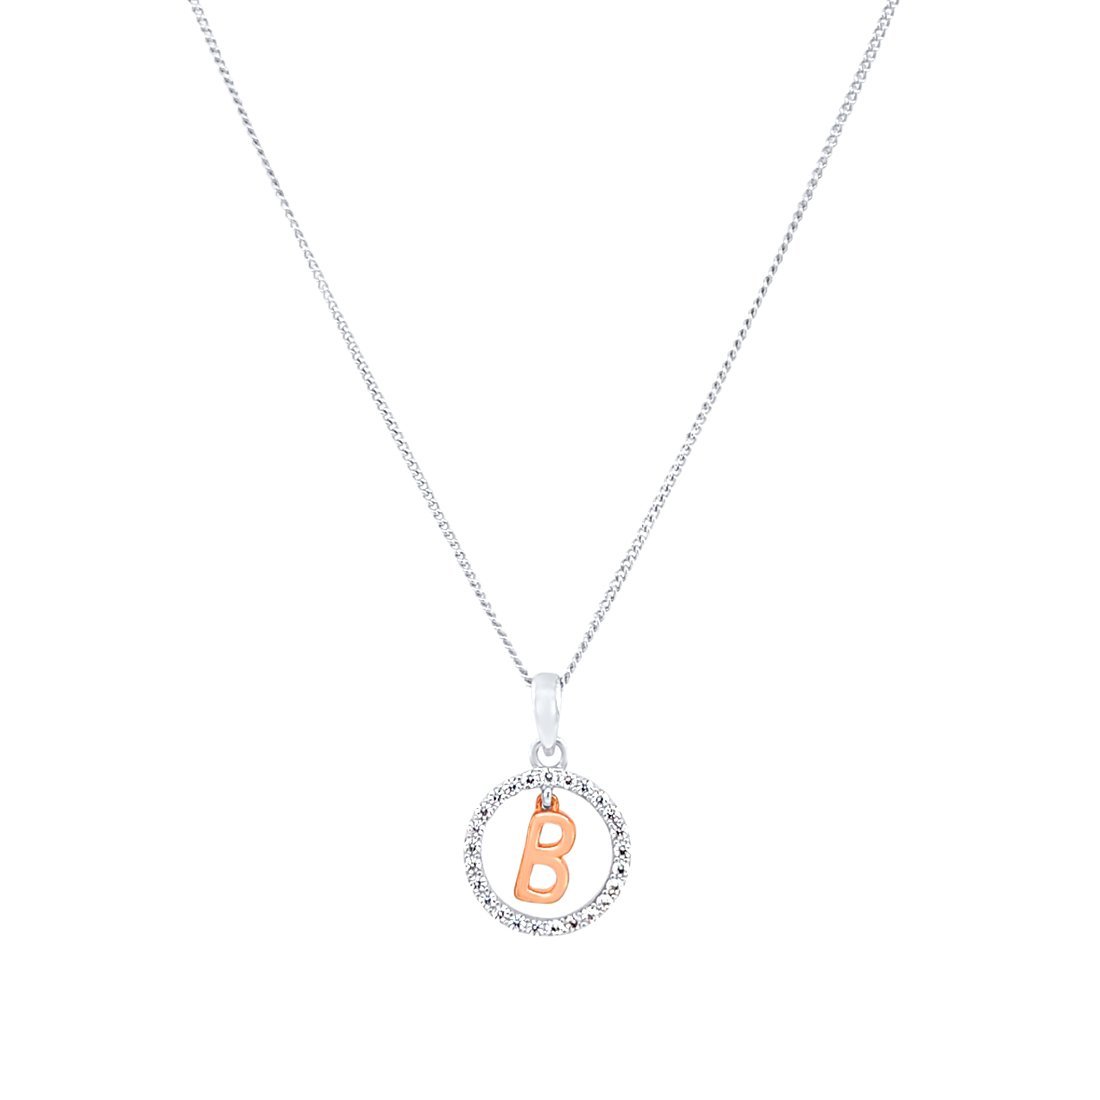 Sterling Silver & Rose Plated Initial Necklace with Cubic Zirconias Necklaces Bevilles B 